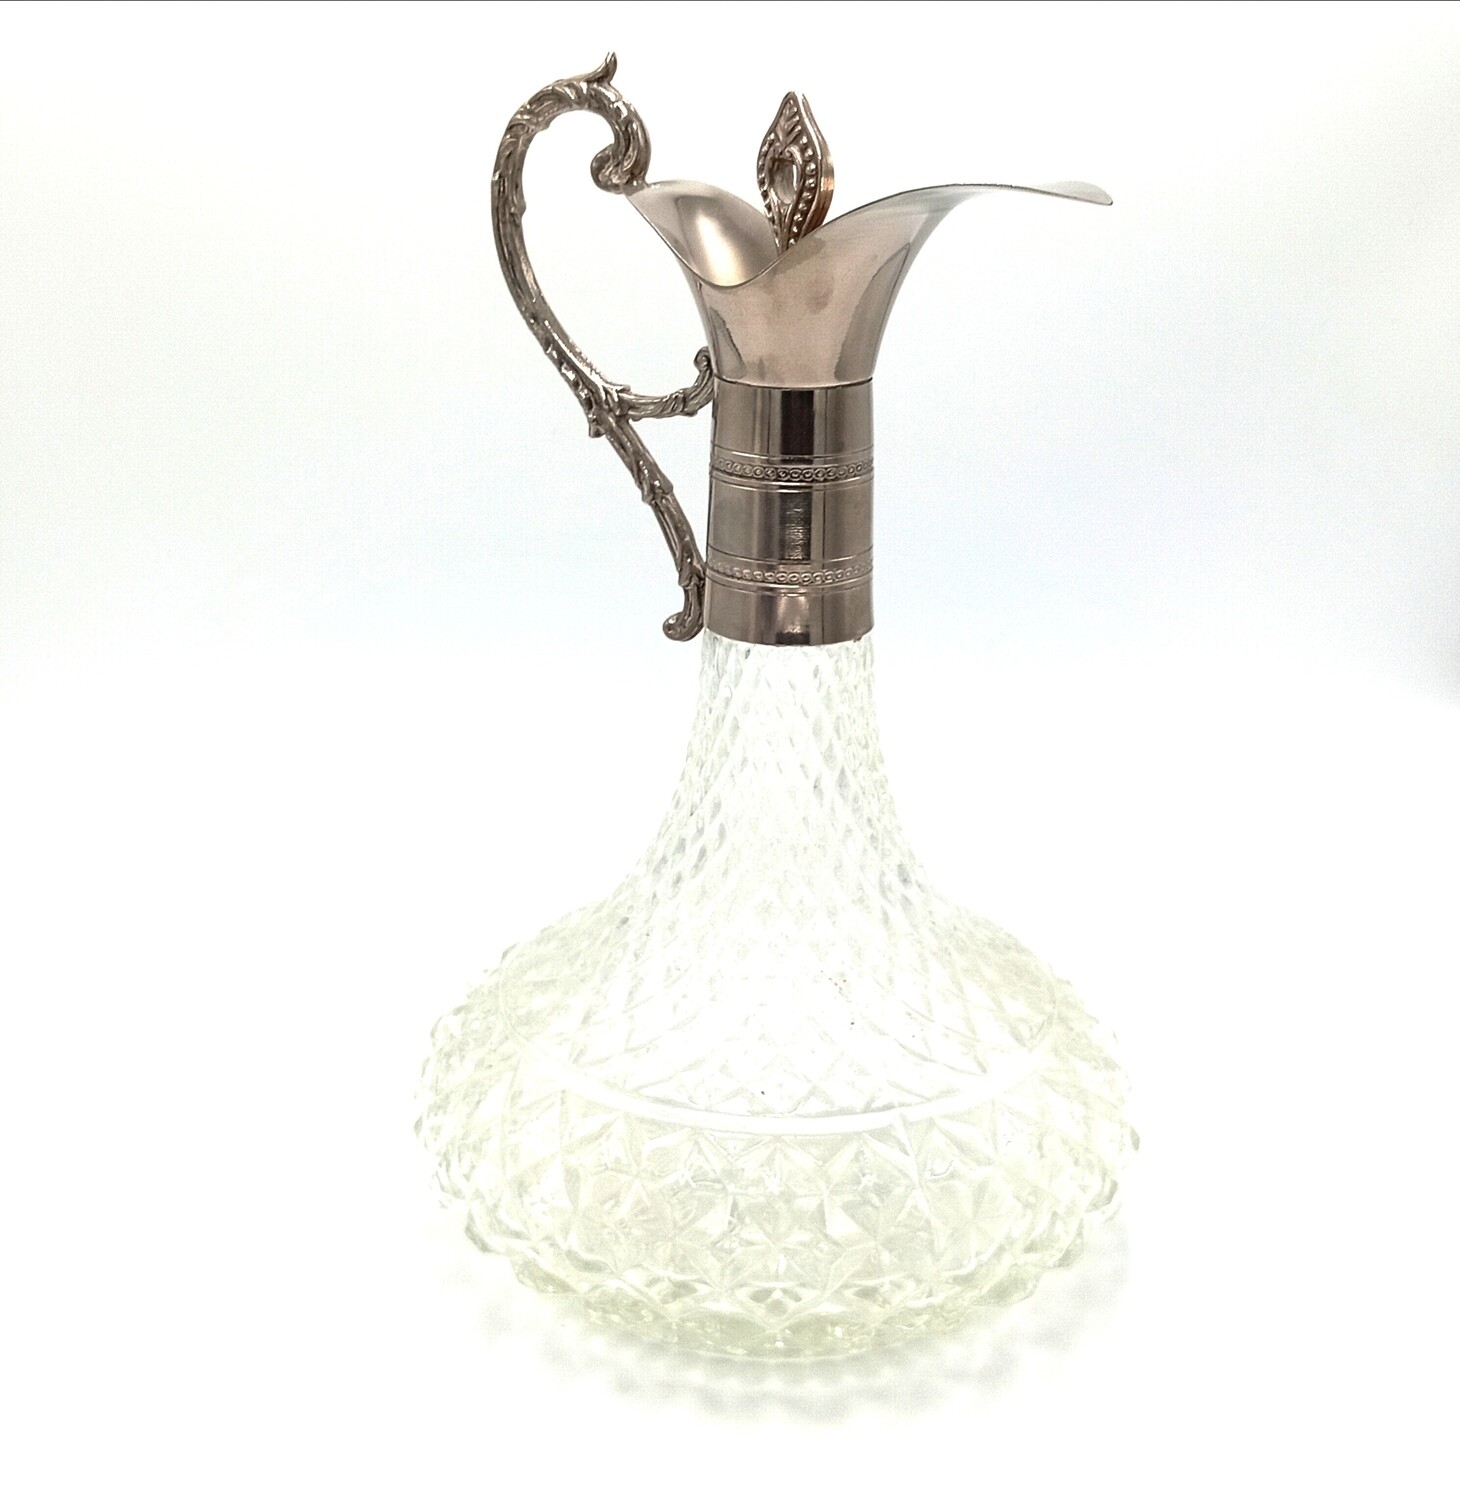 Vintage glass sherry decanter with silverplated top